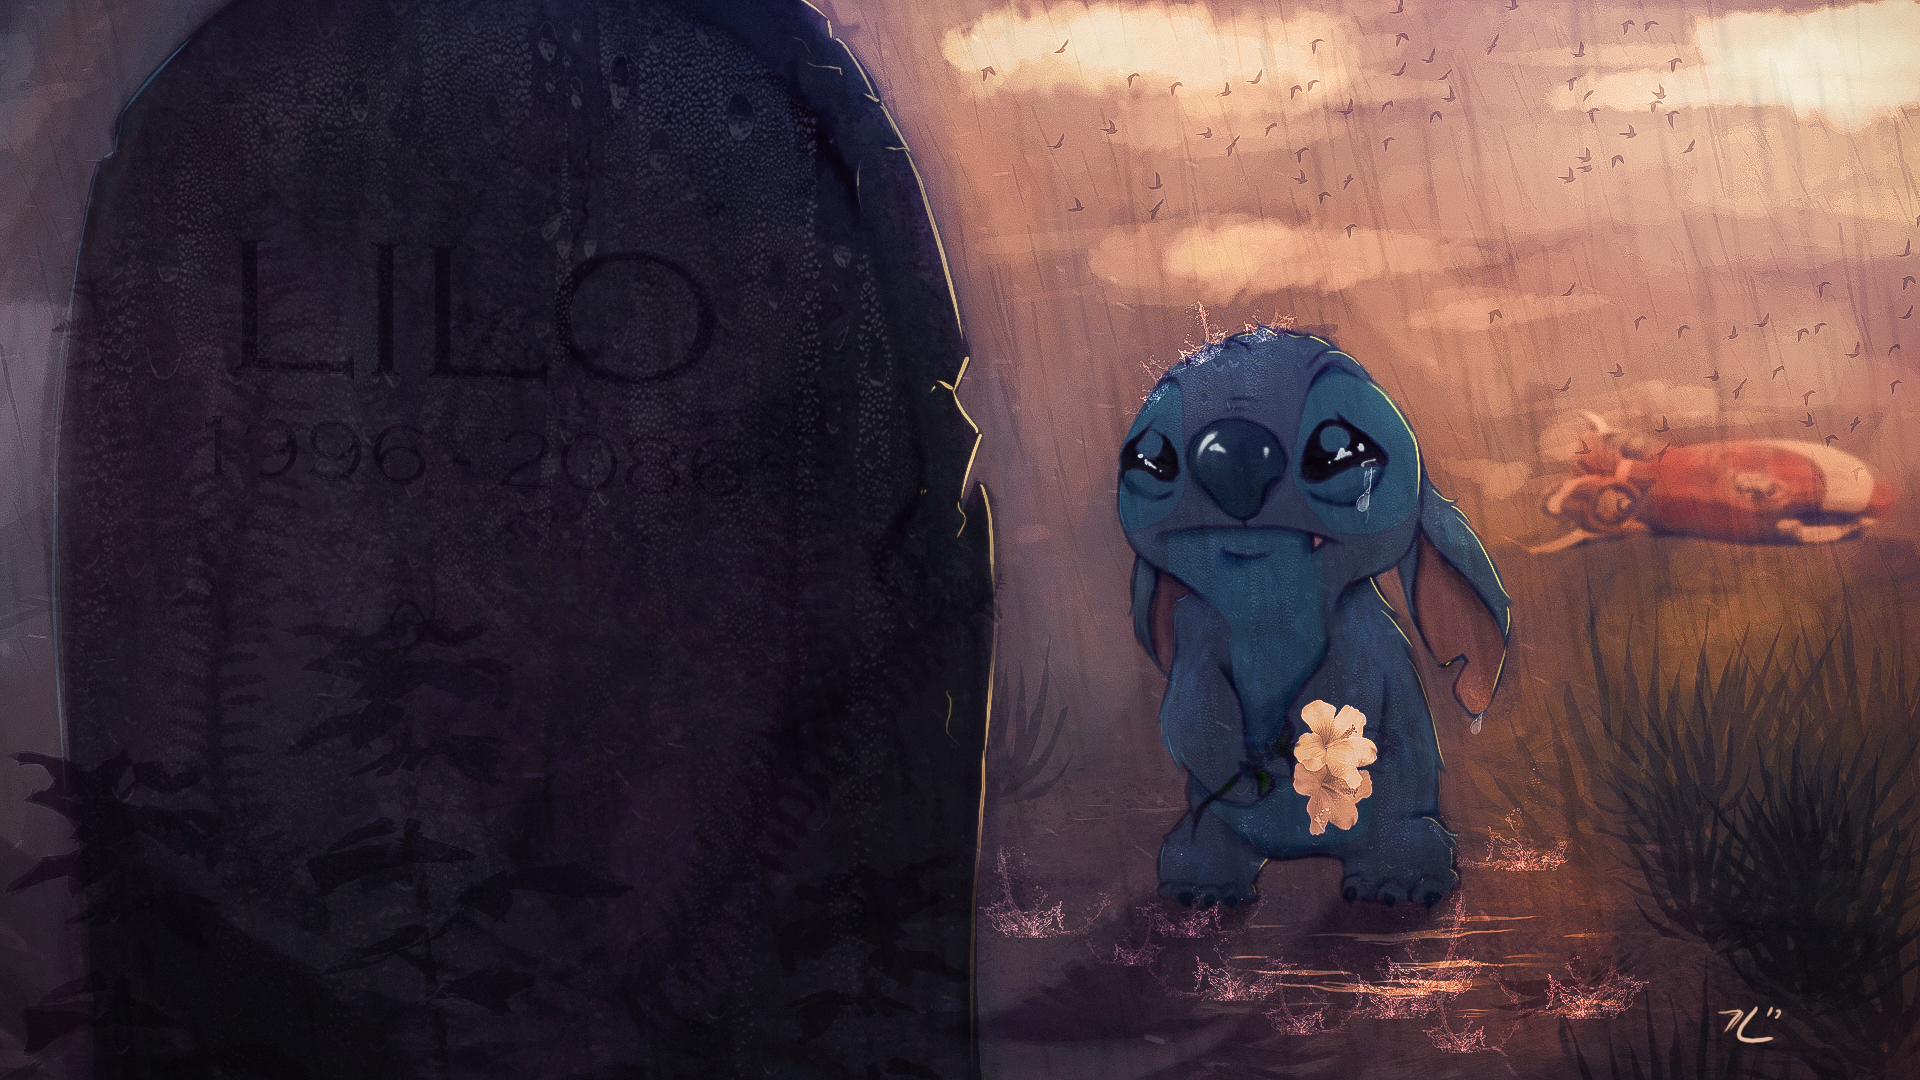 cute stitch wallpaper for laptop